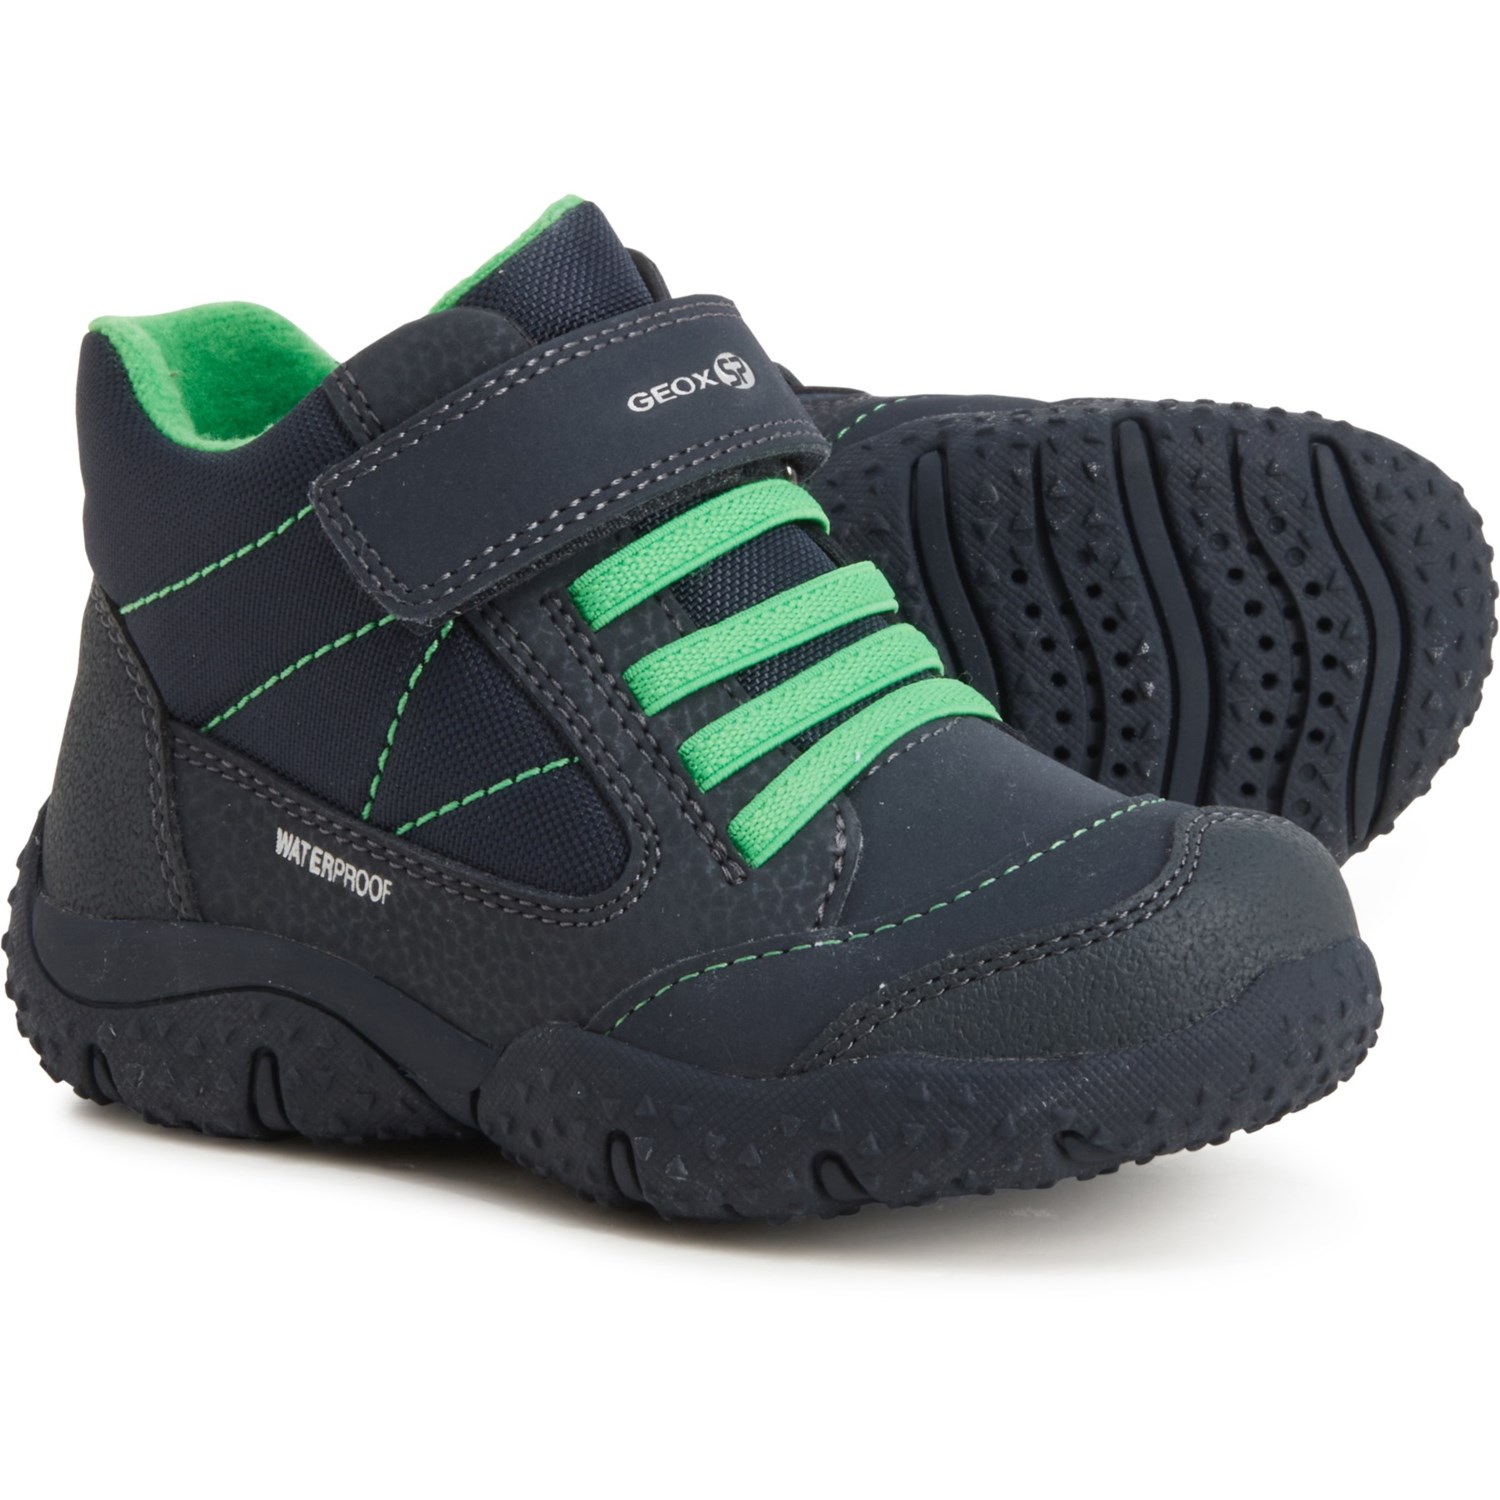 geox toddler boy shoes